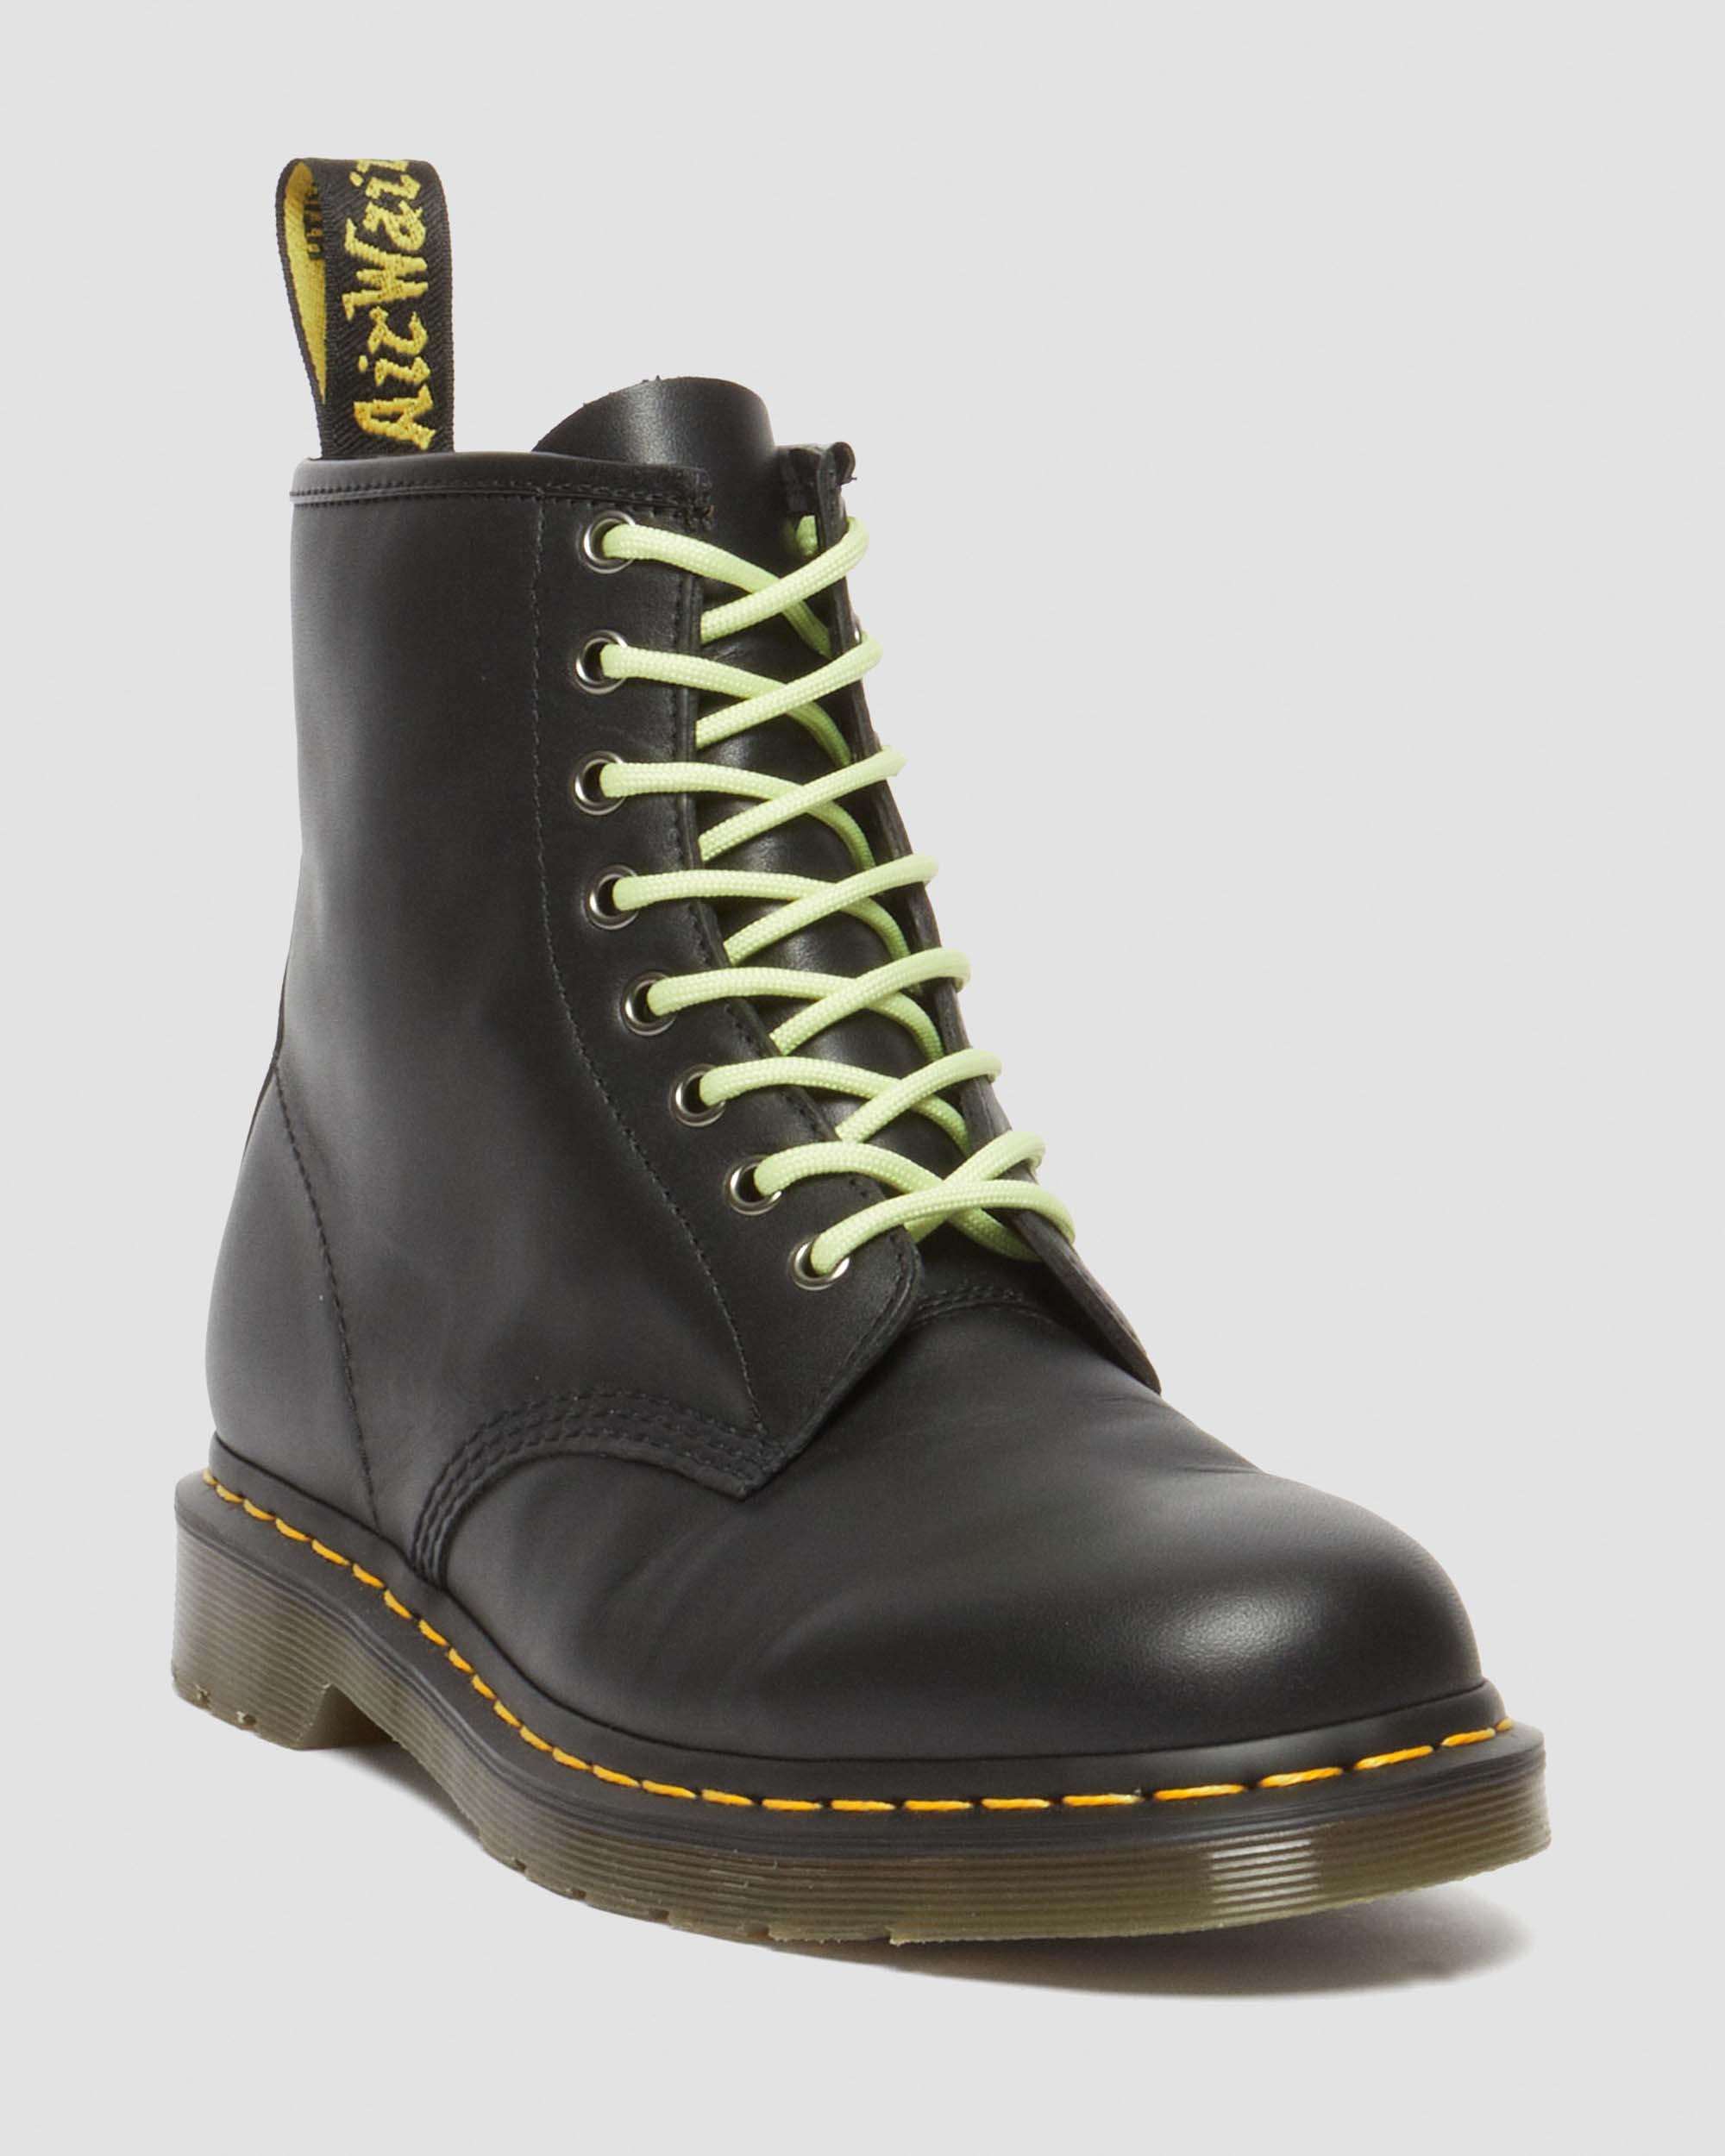 THE NATIONAL GALLERY 1460 HARMEN STEENWYCK LEATHER BOOTS in Multi 